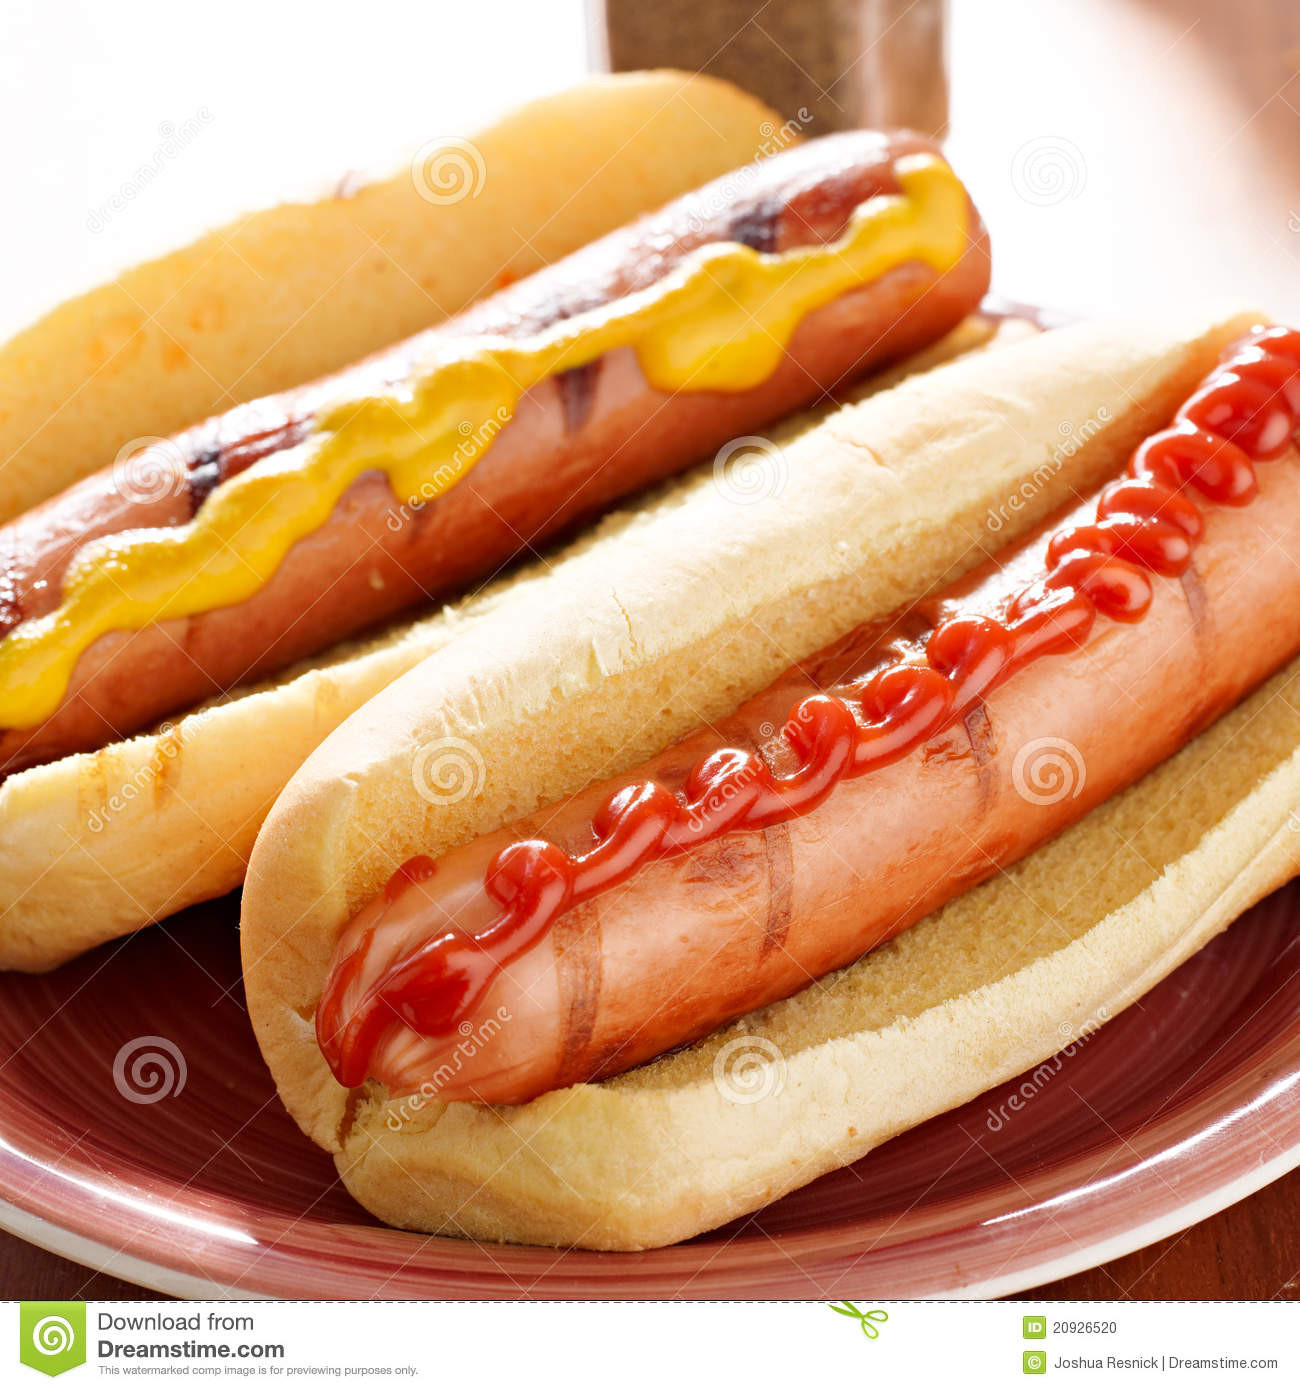 Condiments For Hot Dogs
 Two Hot Dogs With Condiments Stock Image of dogs